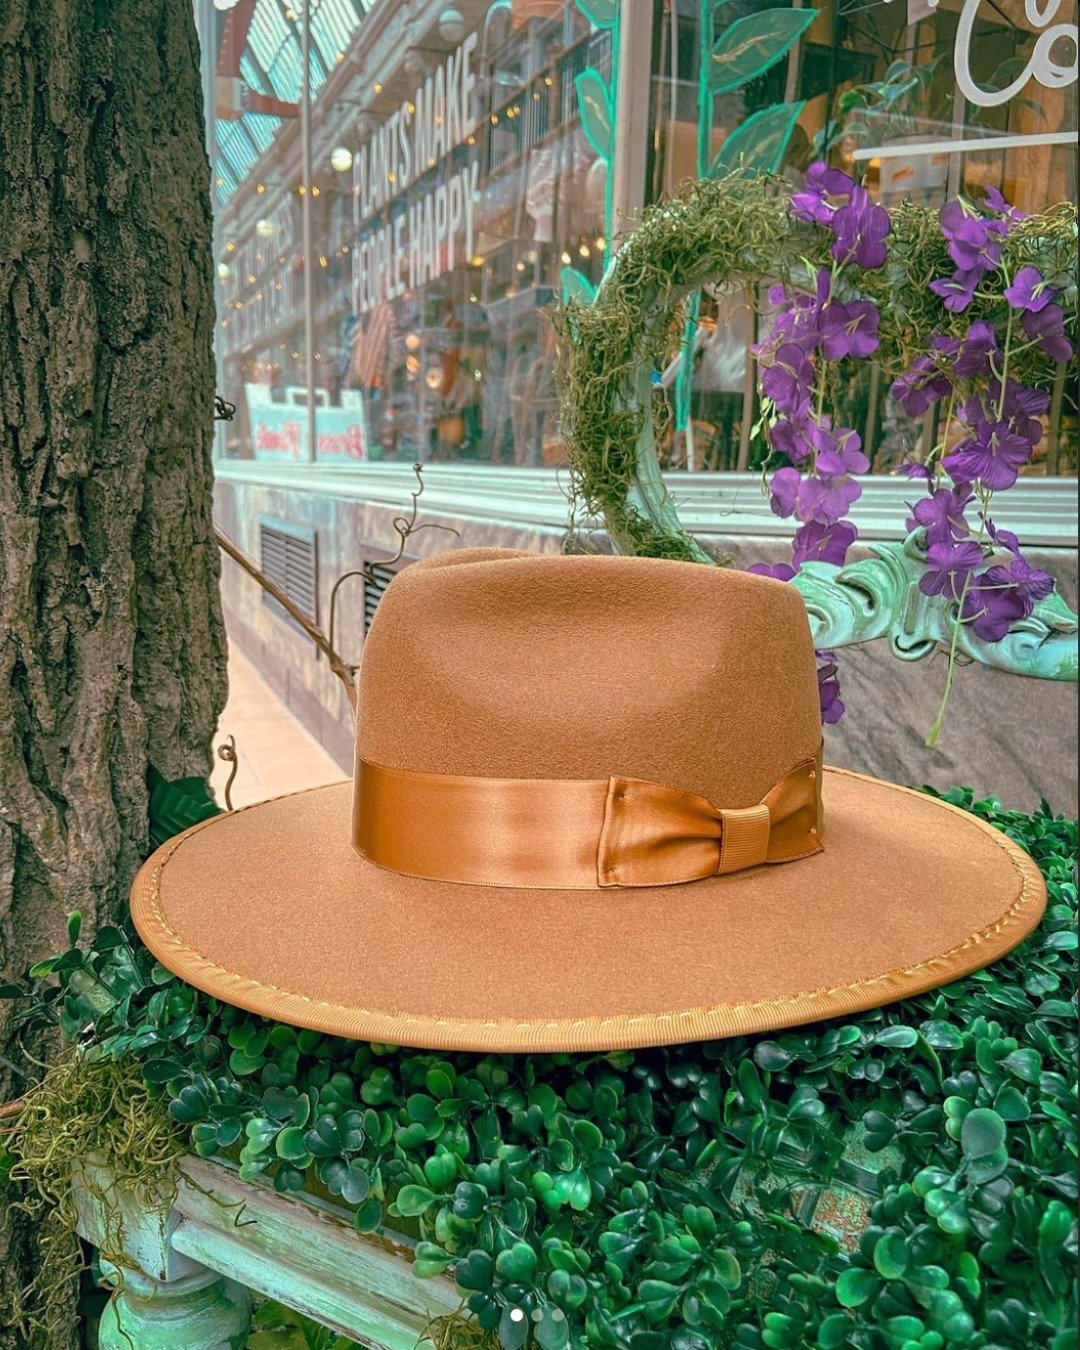 The warm weather is here and it's time to upgrade your accessory game and we have just the spot for you: Mike the Hatter! 🎩 From trendy styles to classic looks, they've got you covered with a wide selection of hats that scream spring/summer vibes! ?